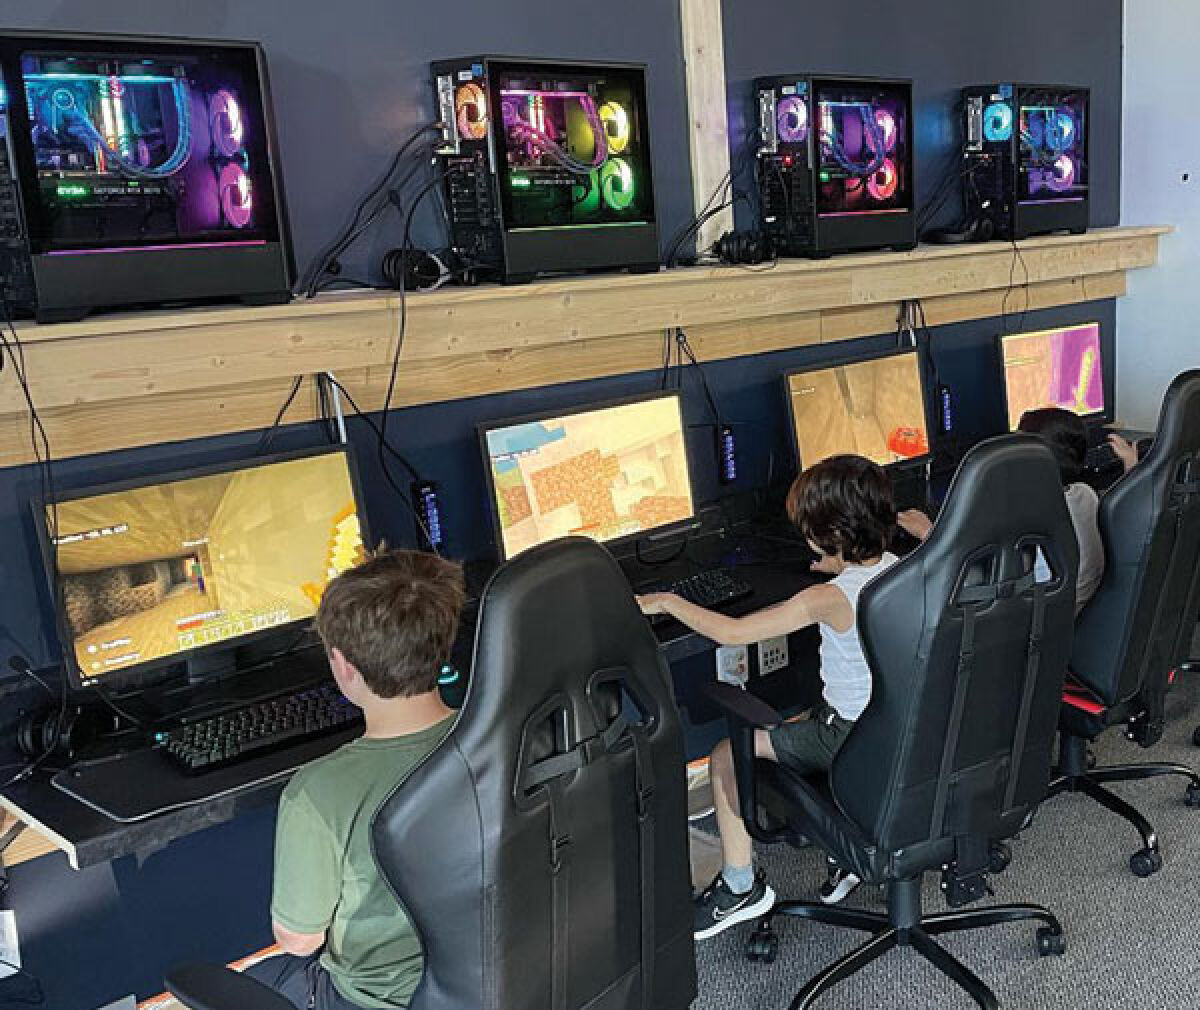  AoE Esports is teaming with Troy schools for a new esports league for high school students. The Troy Terminators esports team will compete against teams from around the world in games such as “Rocket League,” “Fortnite” and “Overwatch.” 